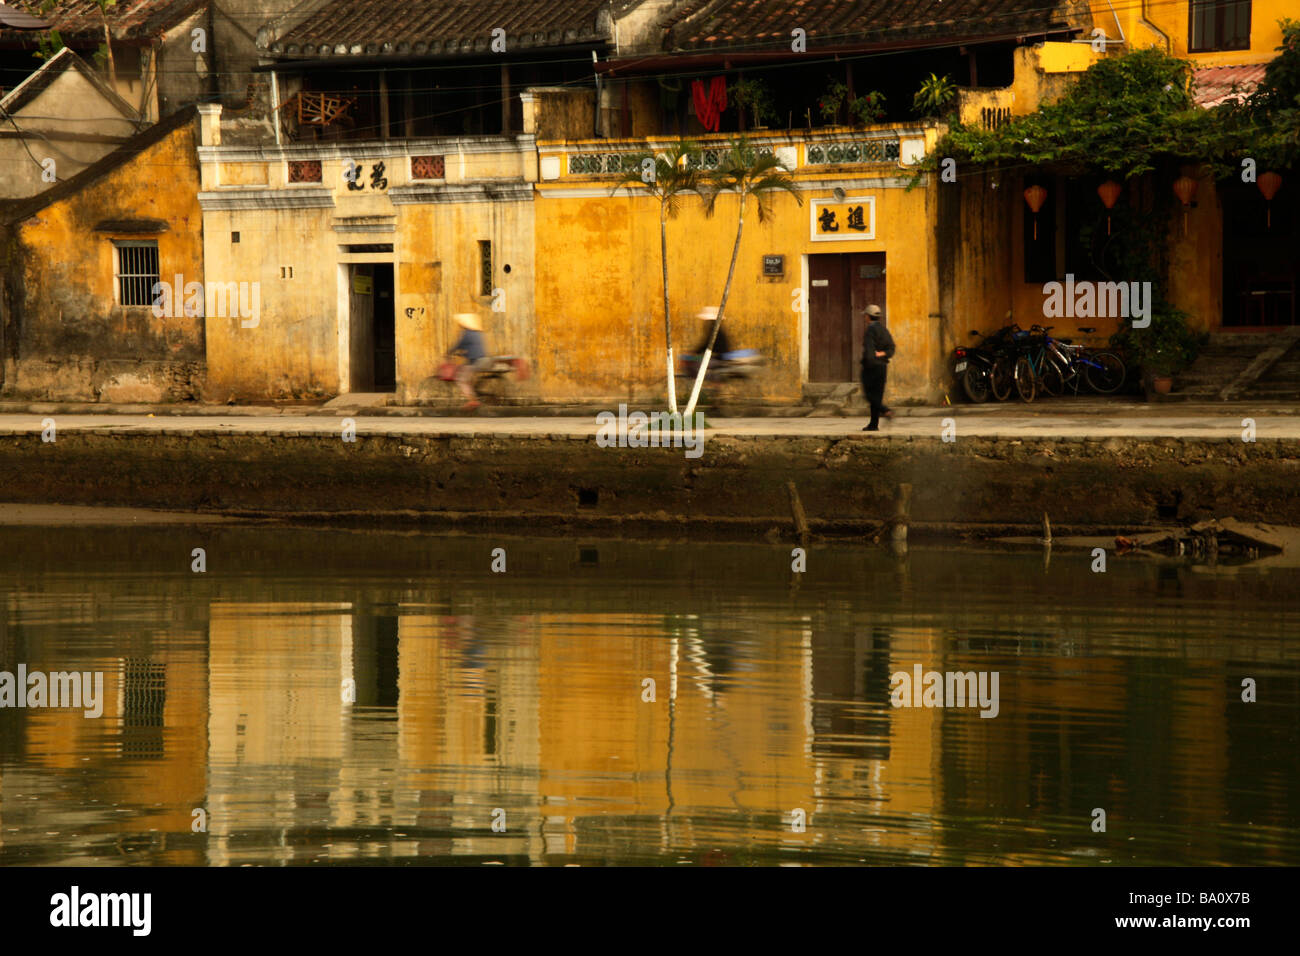 cyclists on the promenade at the Thu Bon River in Hoi An Vietnam Stock Photo